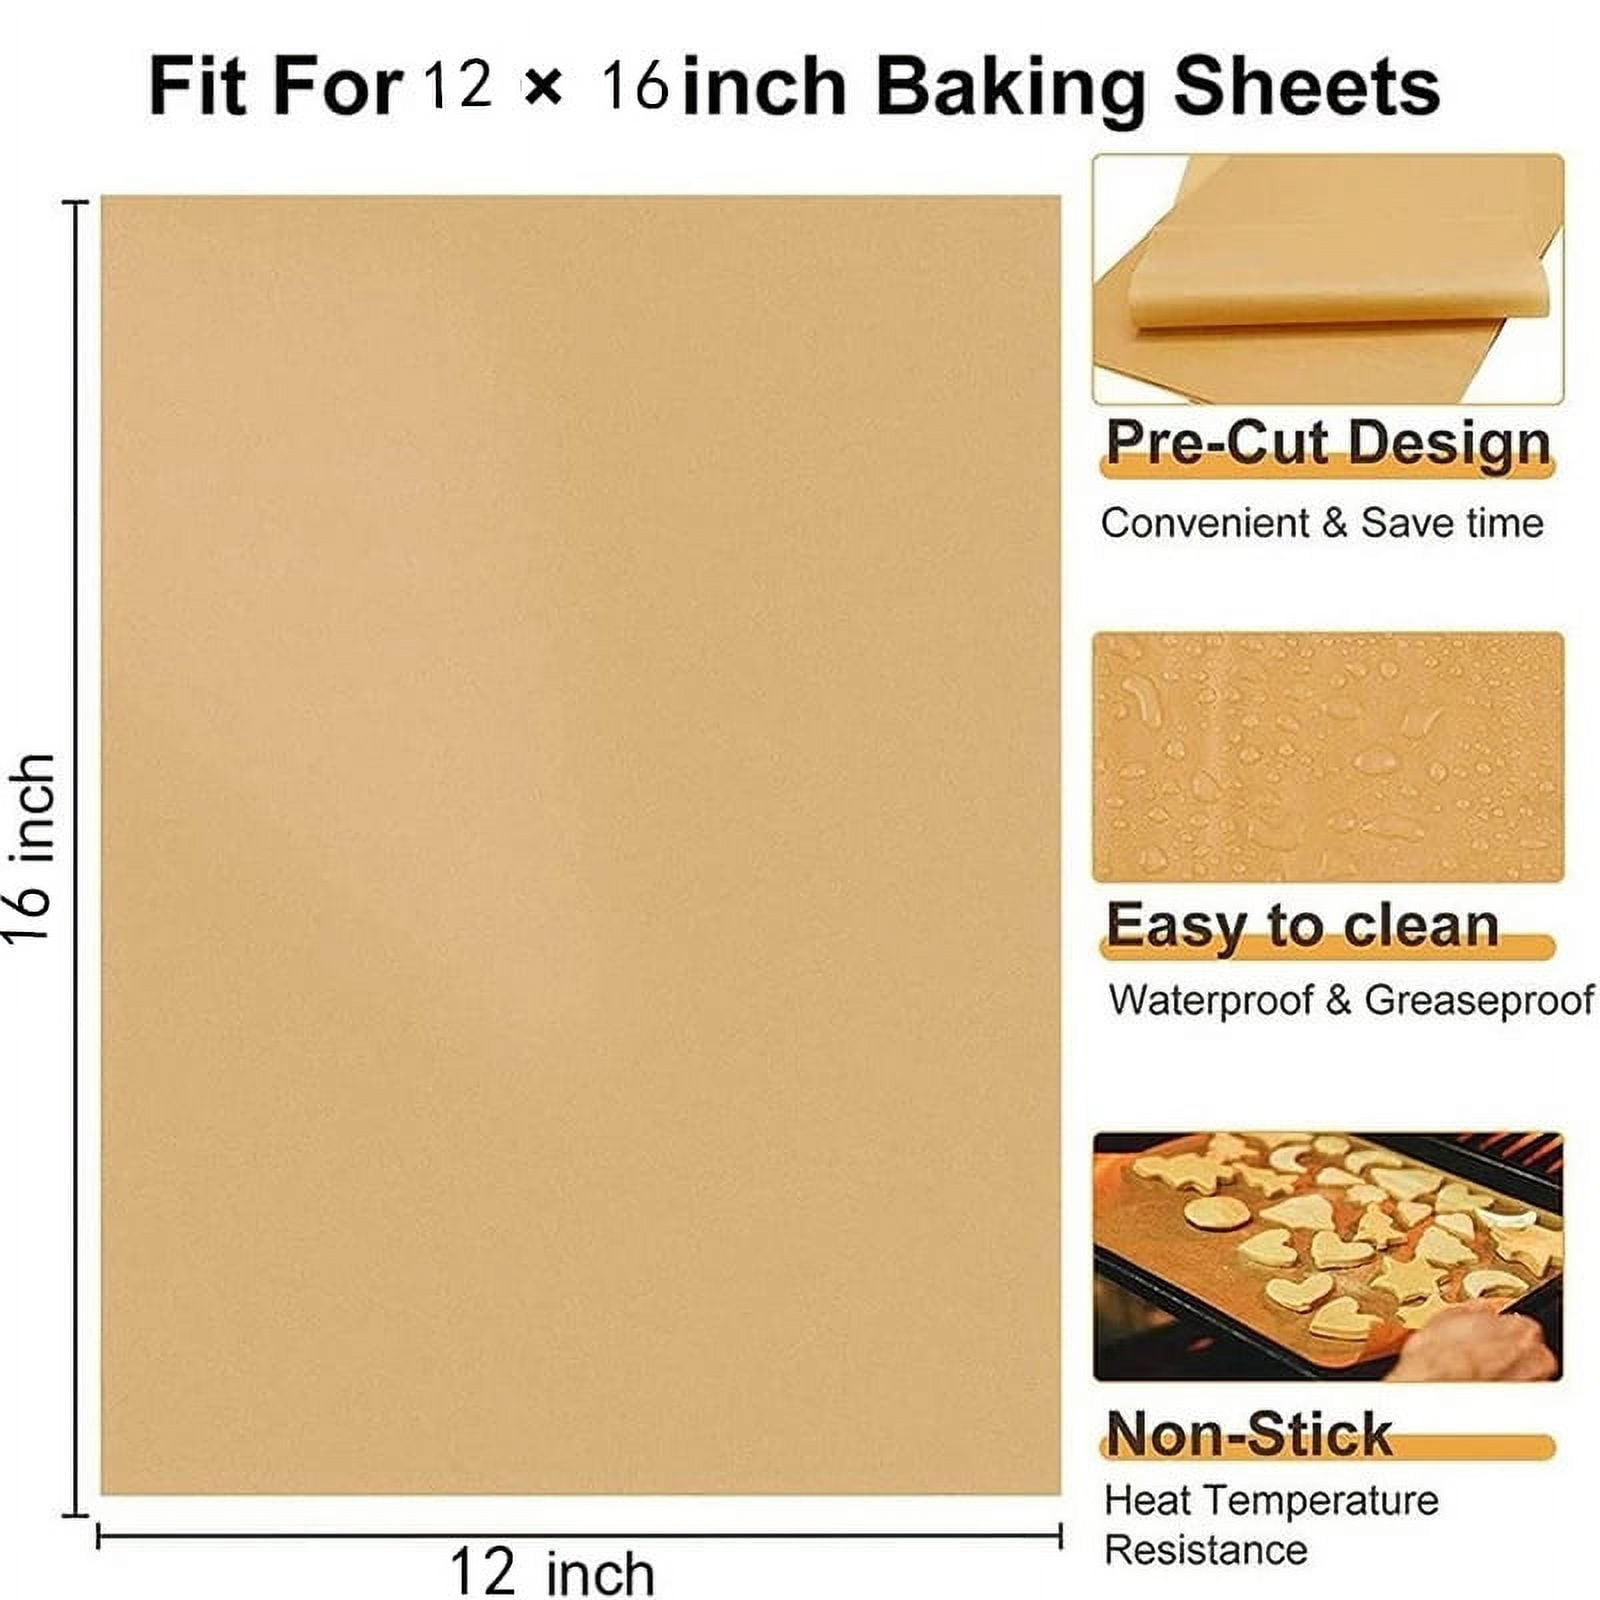 Bekeygirl Printed 200sheets/box 12x16 Parchment Sheets Baking, Non-Stick Unbleached Precut Parchment Paper Sheet for Baking, Cooking, Bread Cup Cake